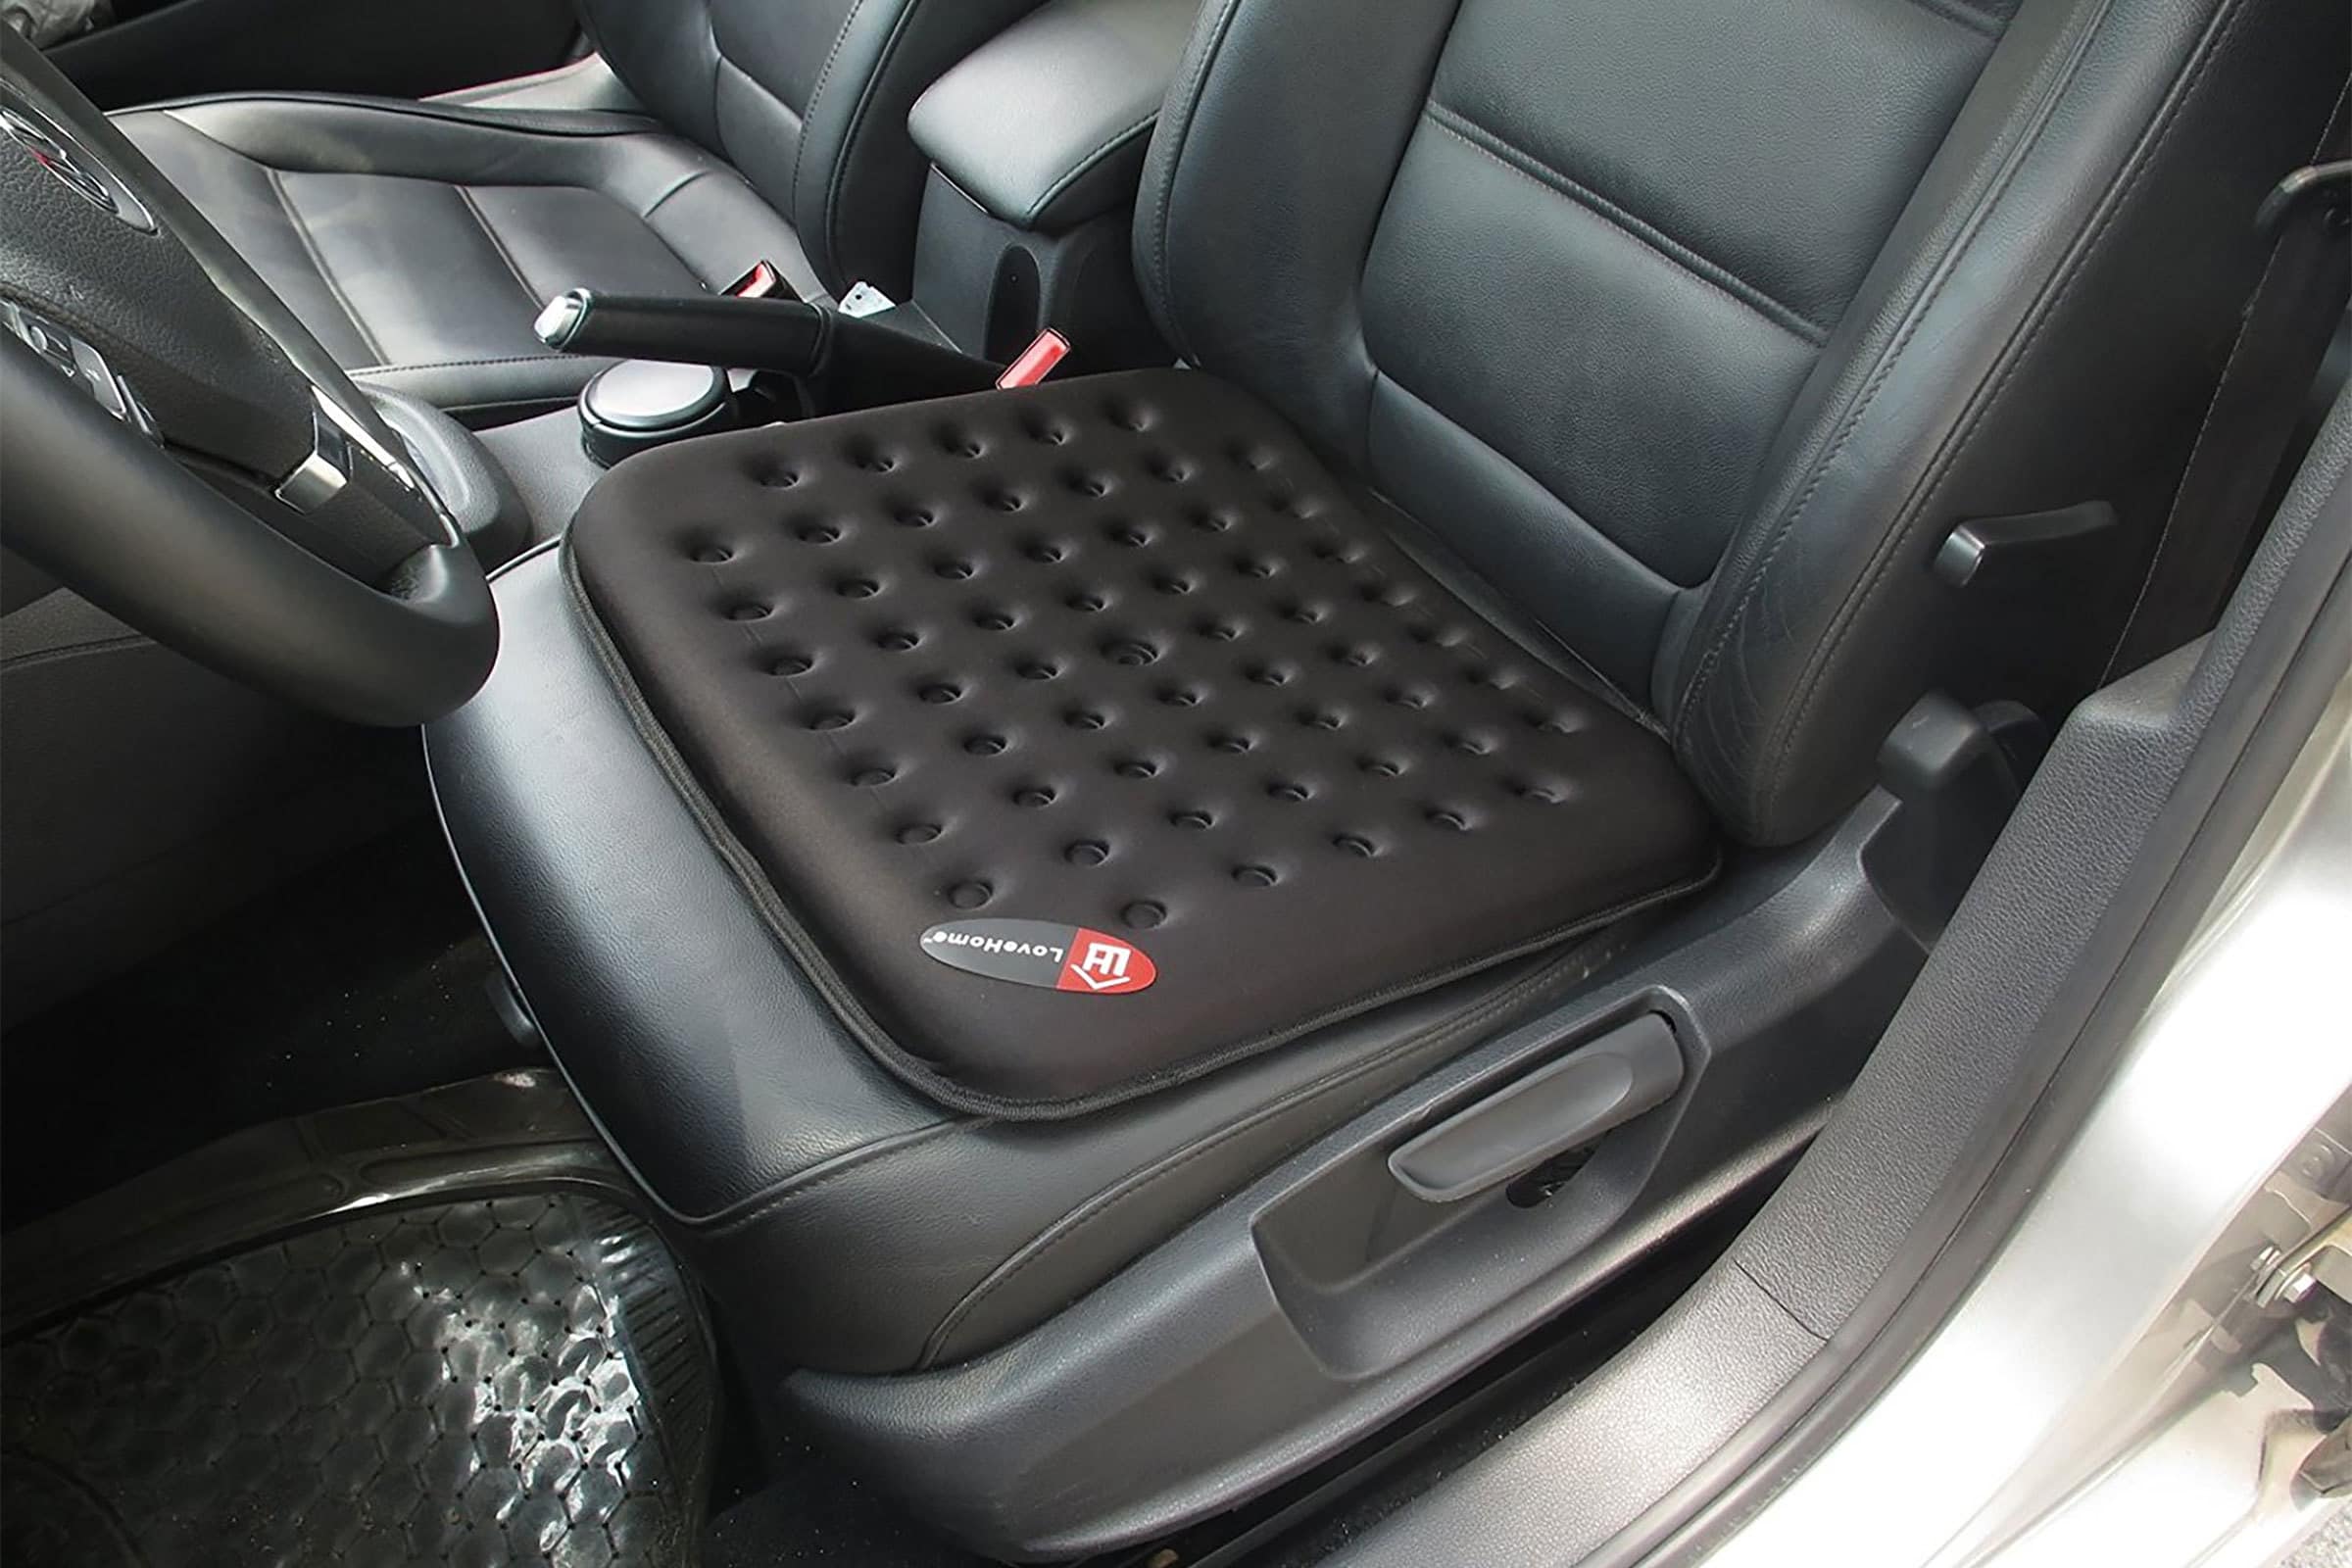 Best Car Seat Cushion For Long Drives Ergonomic And Comfy Options